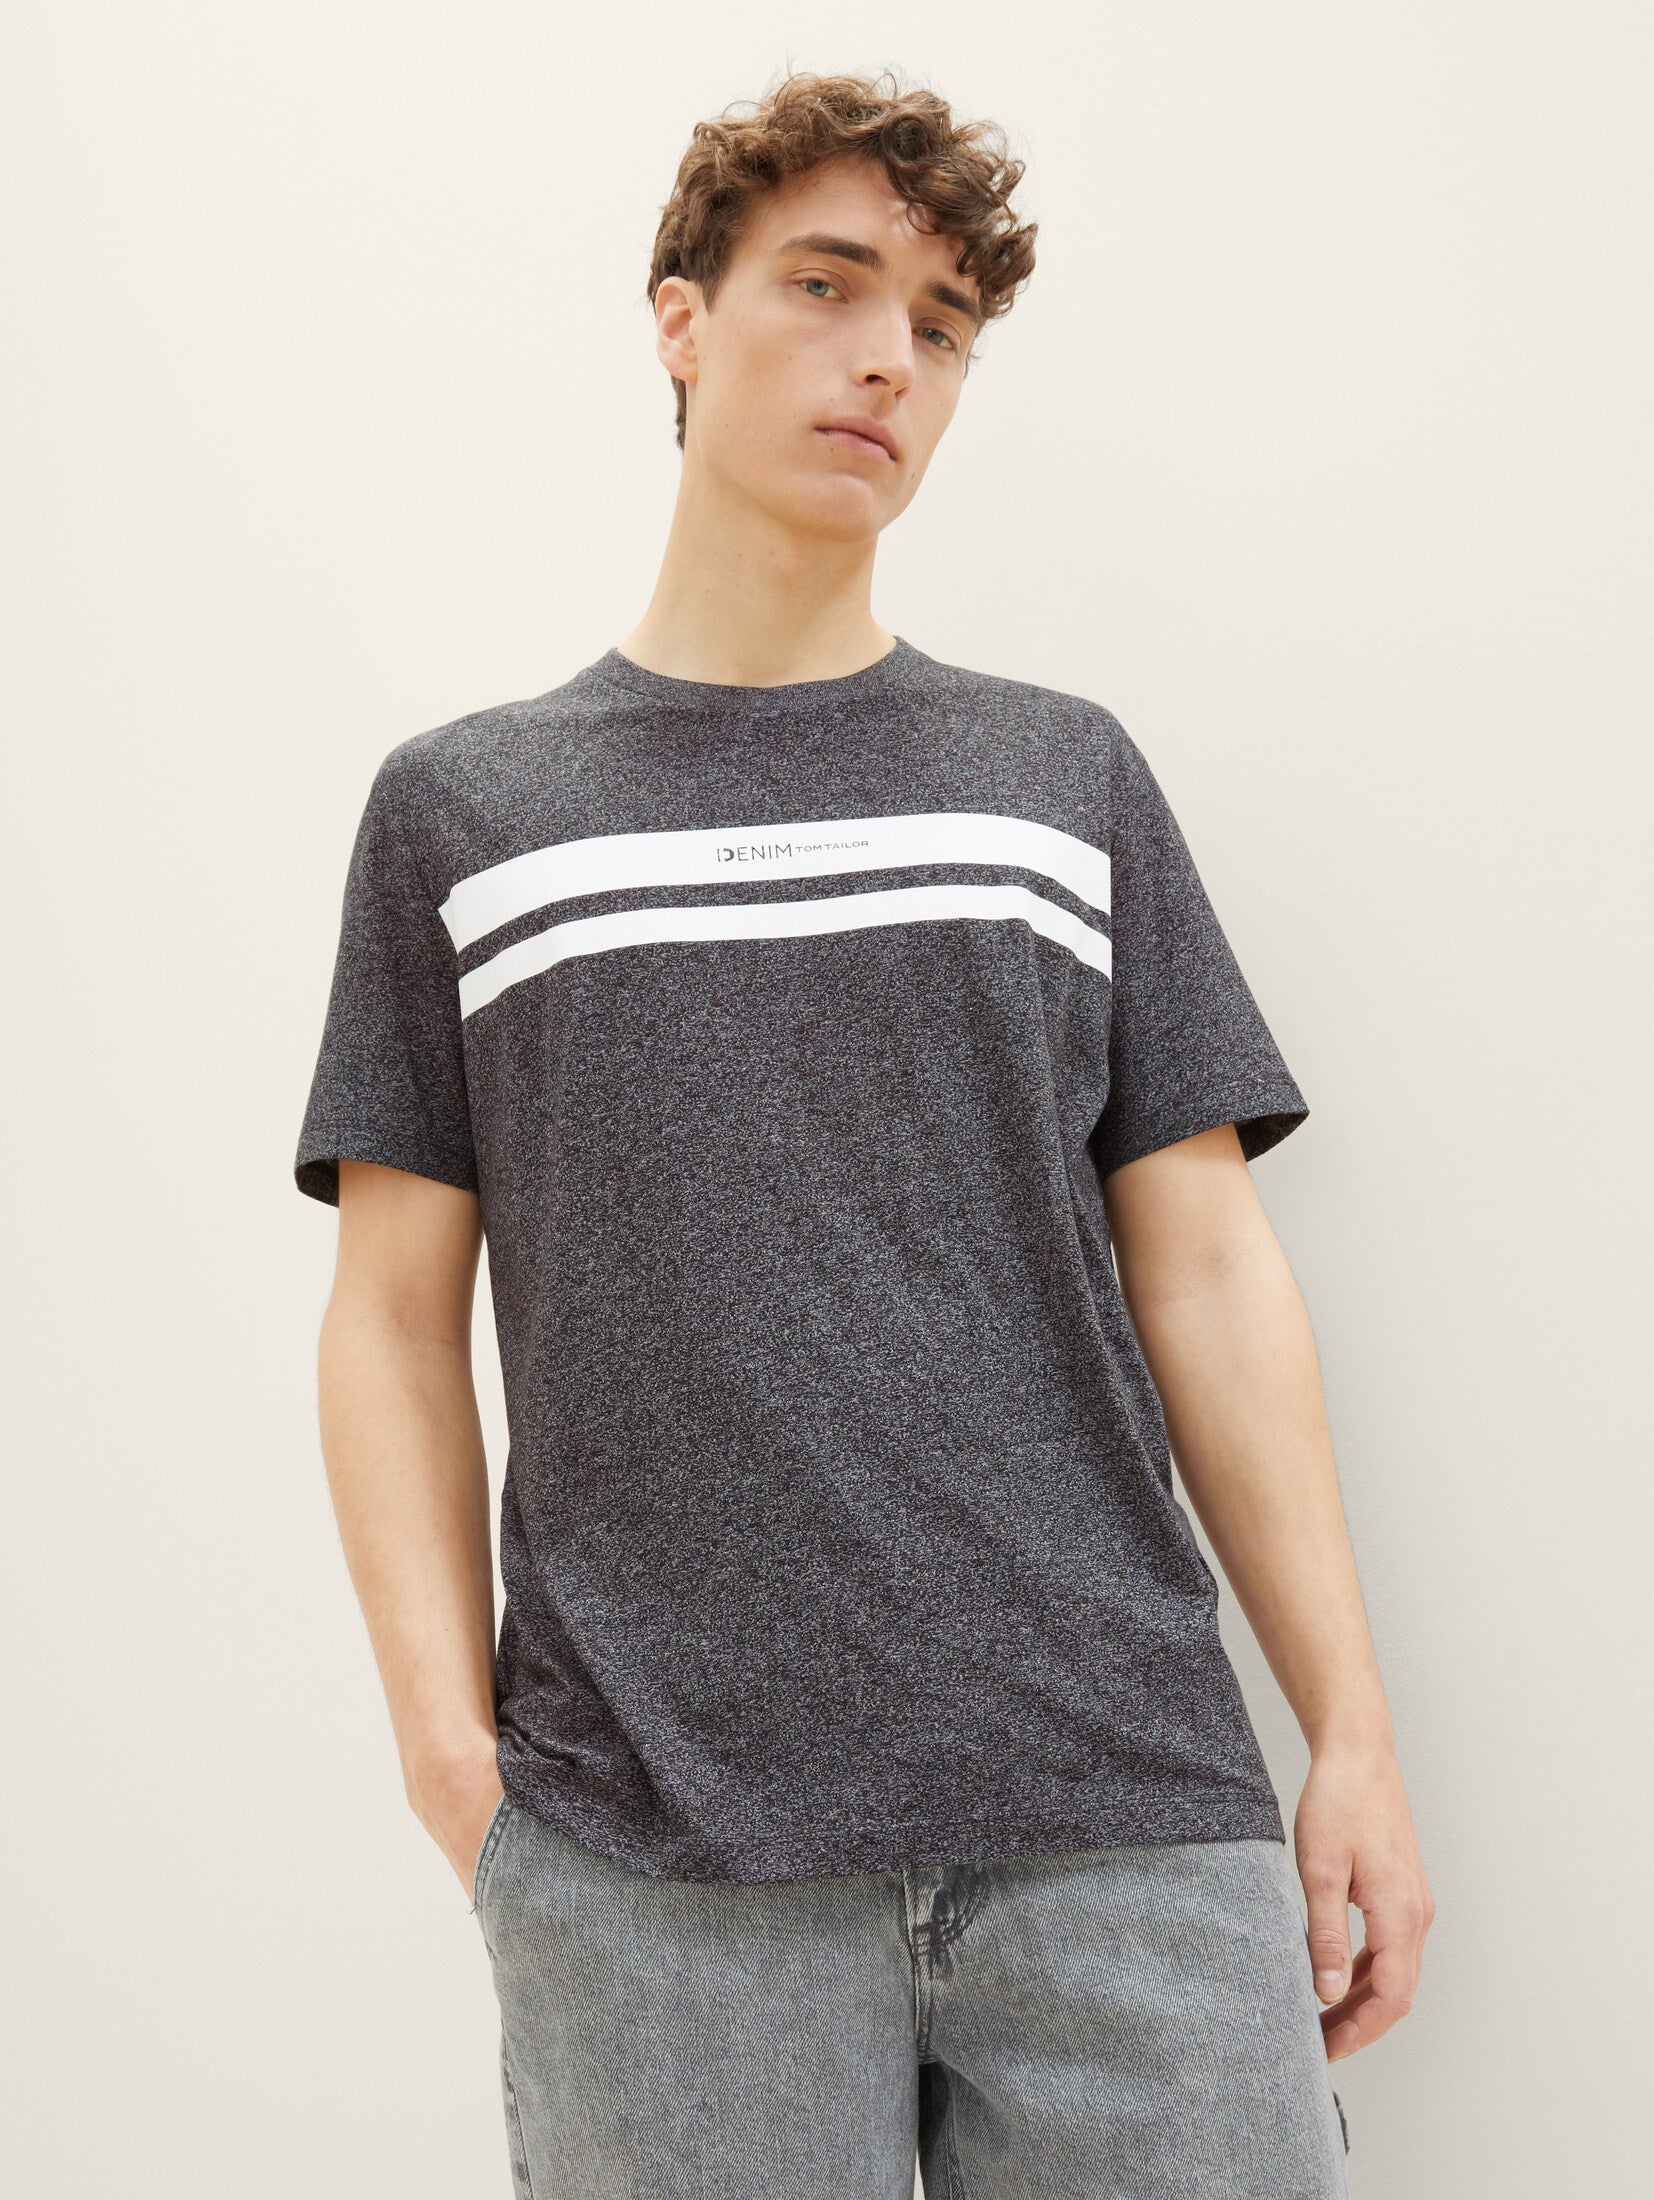 Tom Tailor Black Non-Solid T-shirt With a Print